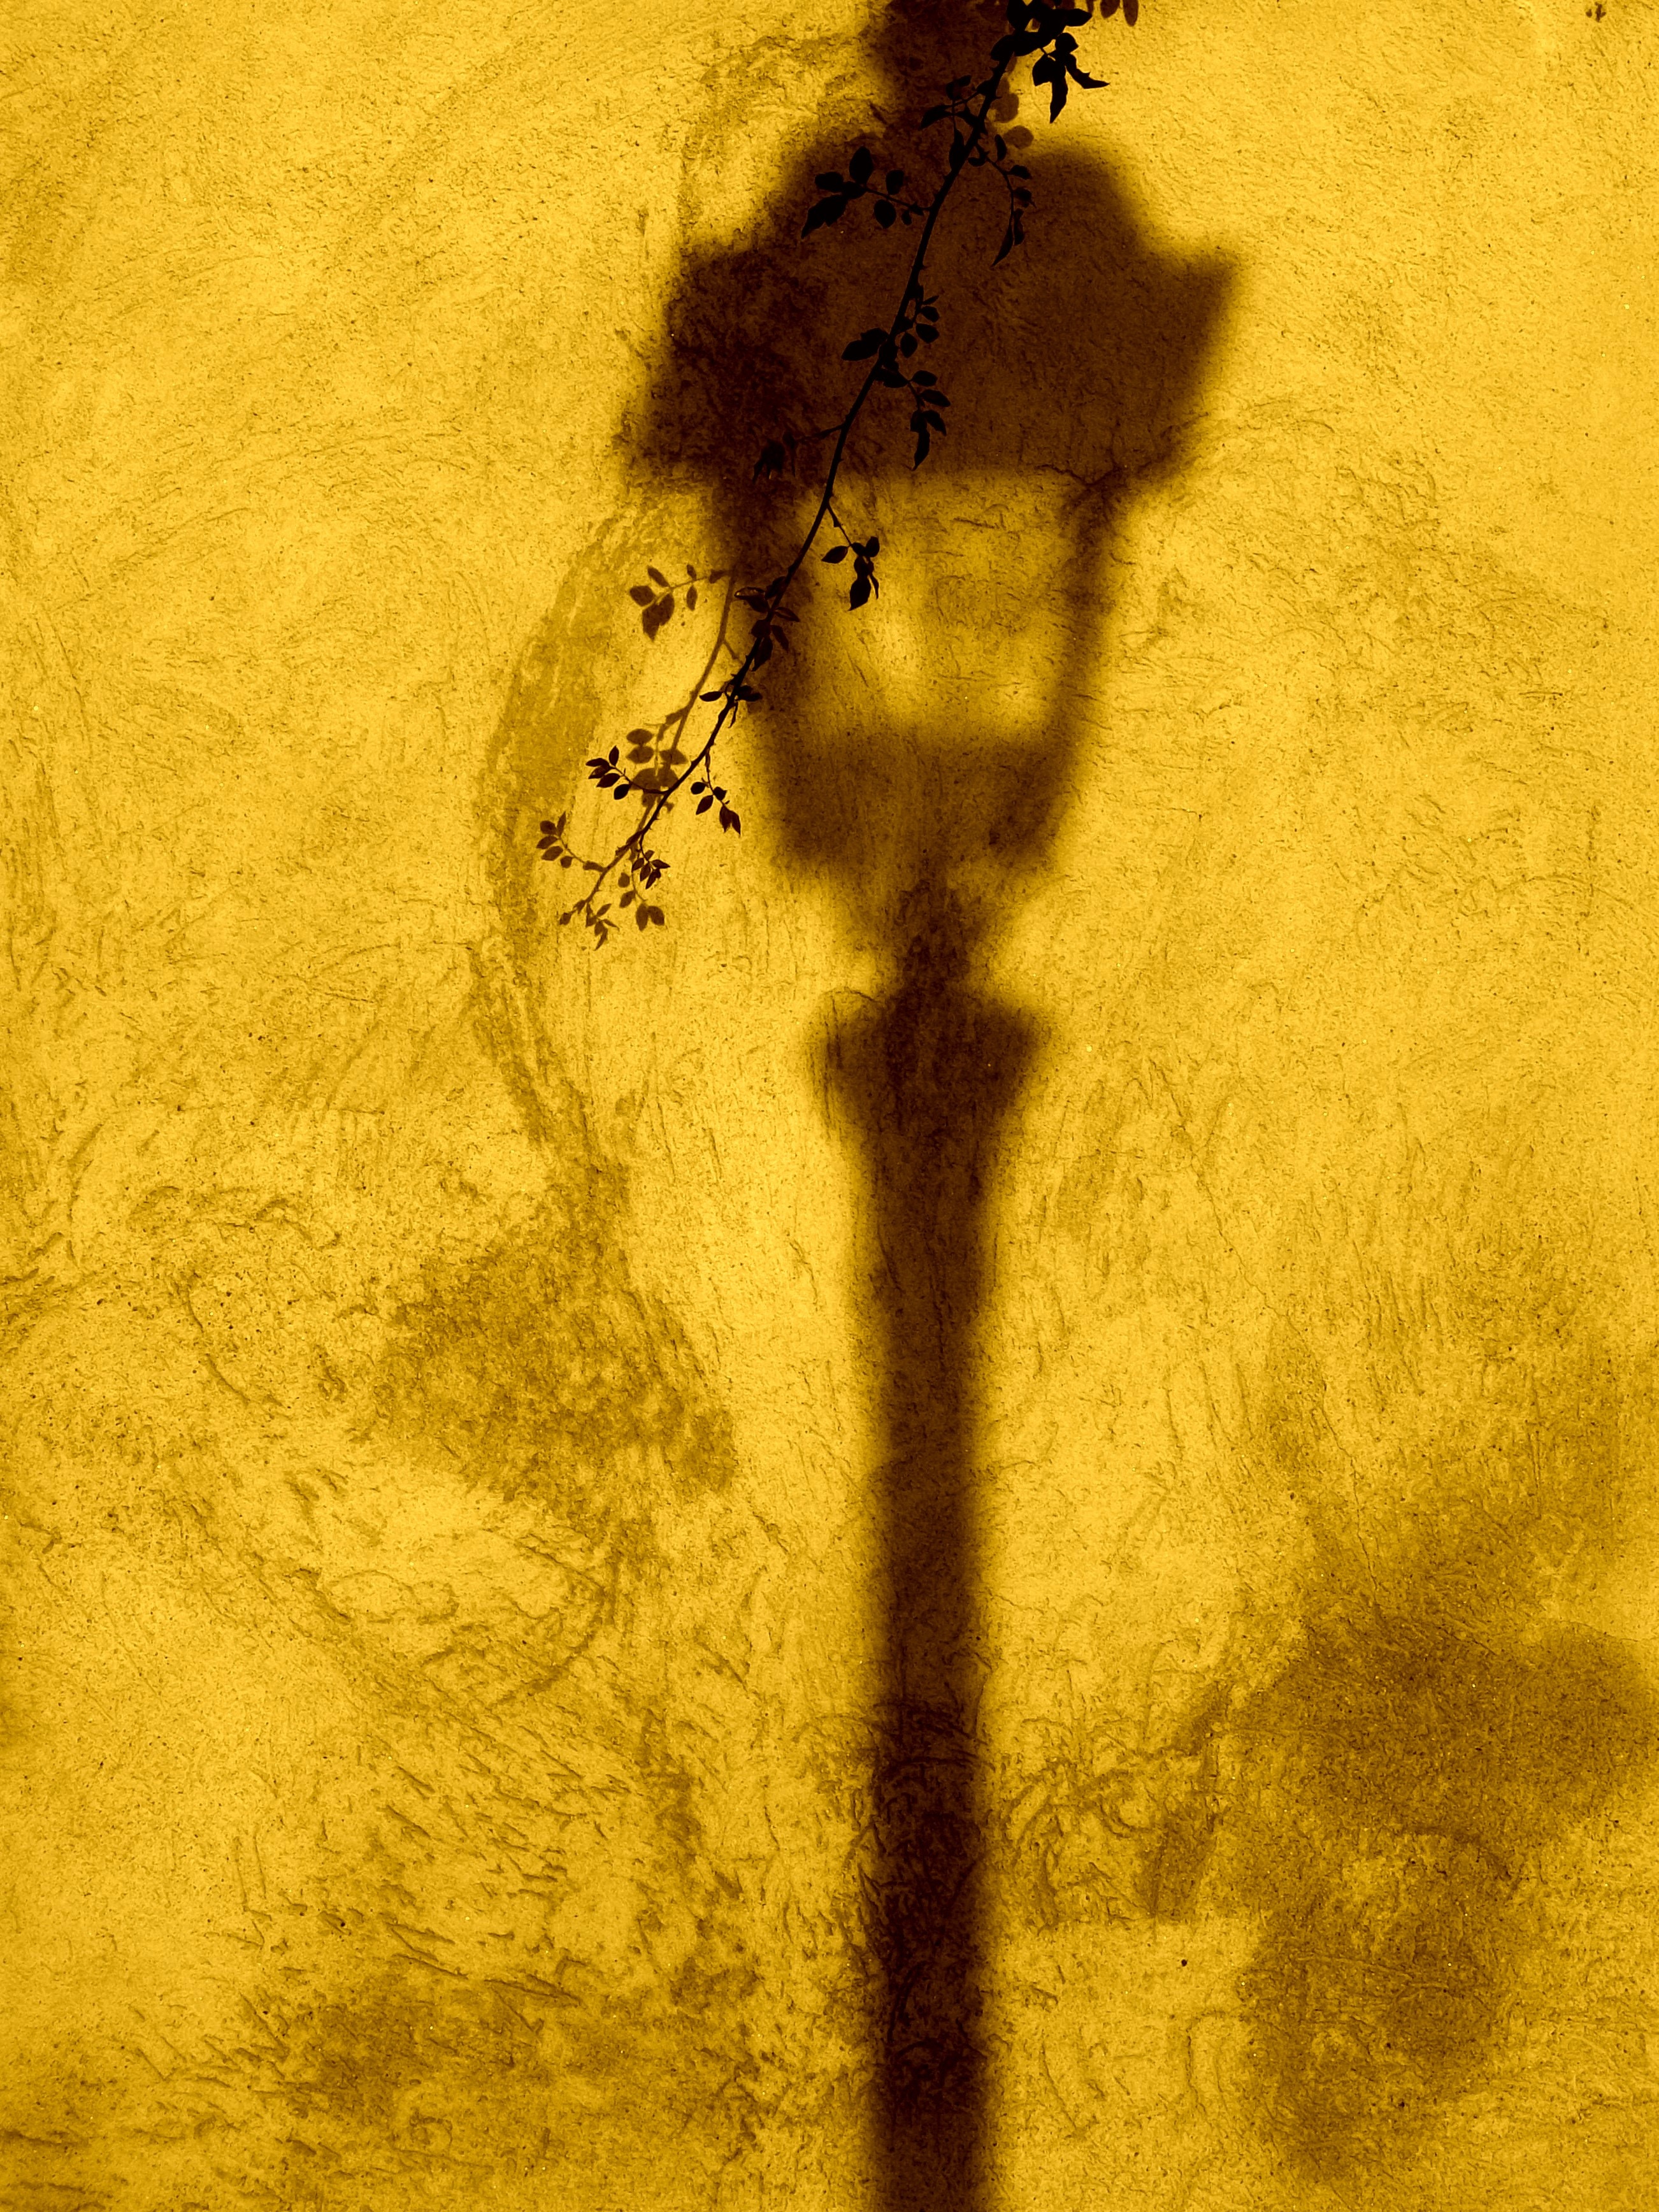 lantern, lamp, yellow, texture, textures, branch, shadow, wall